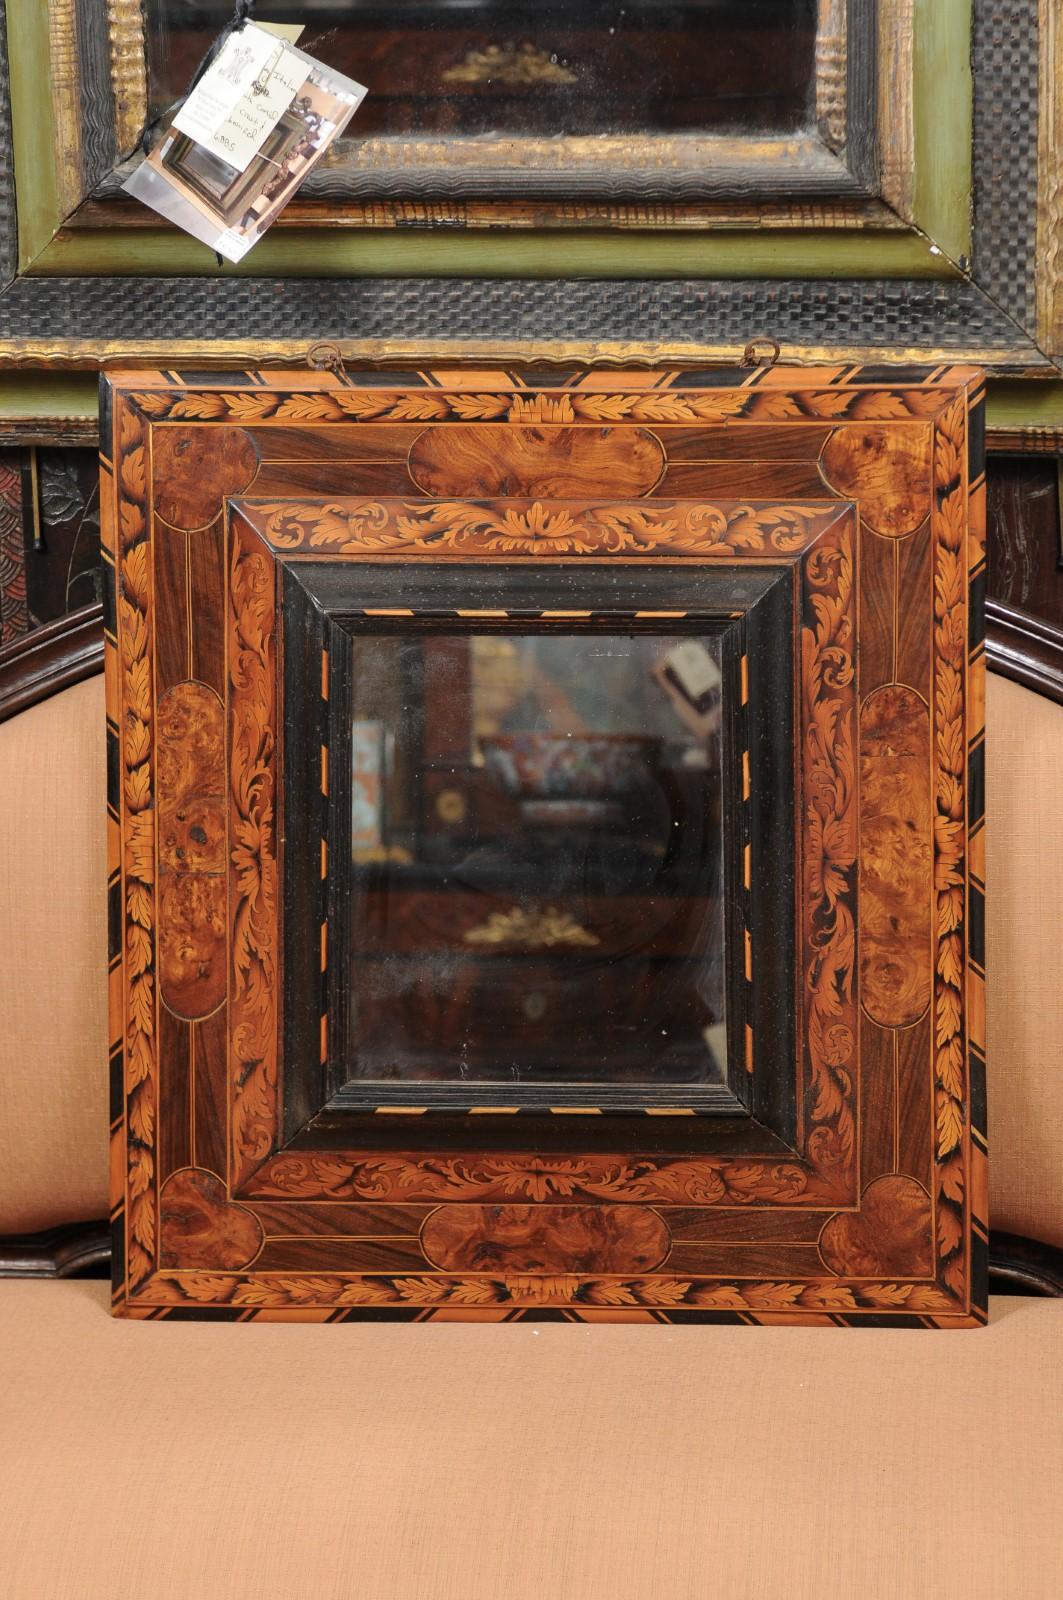 A late 17th century French Inlaid rectangular mirror featuring foliage marquetry in walnut, burled elm and maple. The marquetry on this mirror is an example fine craftsmanship from this time period. The ebonzied detail gives a beautiful contrast to